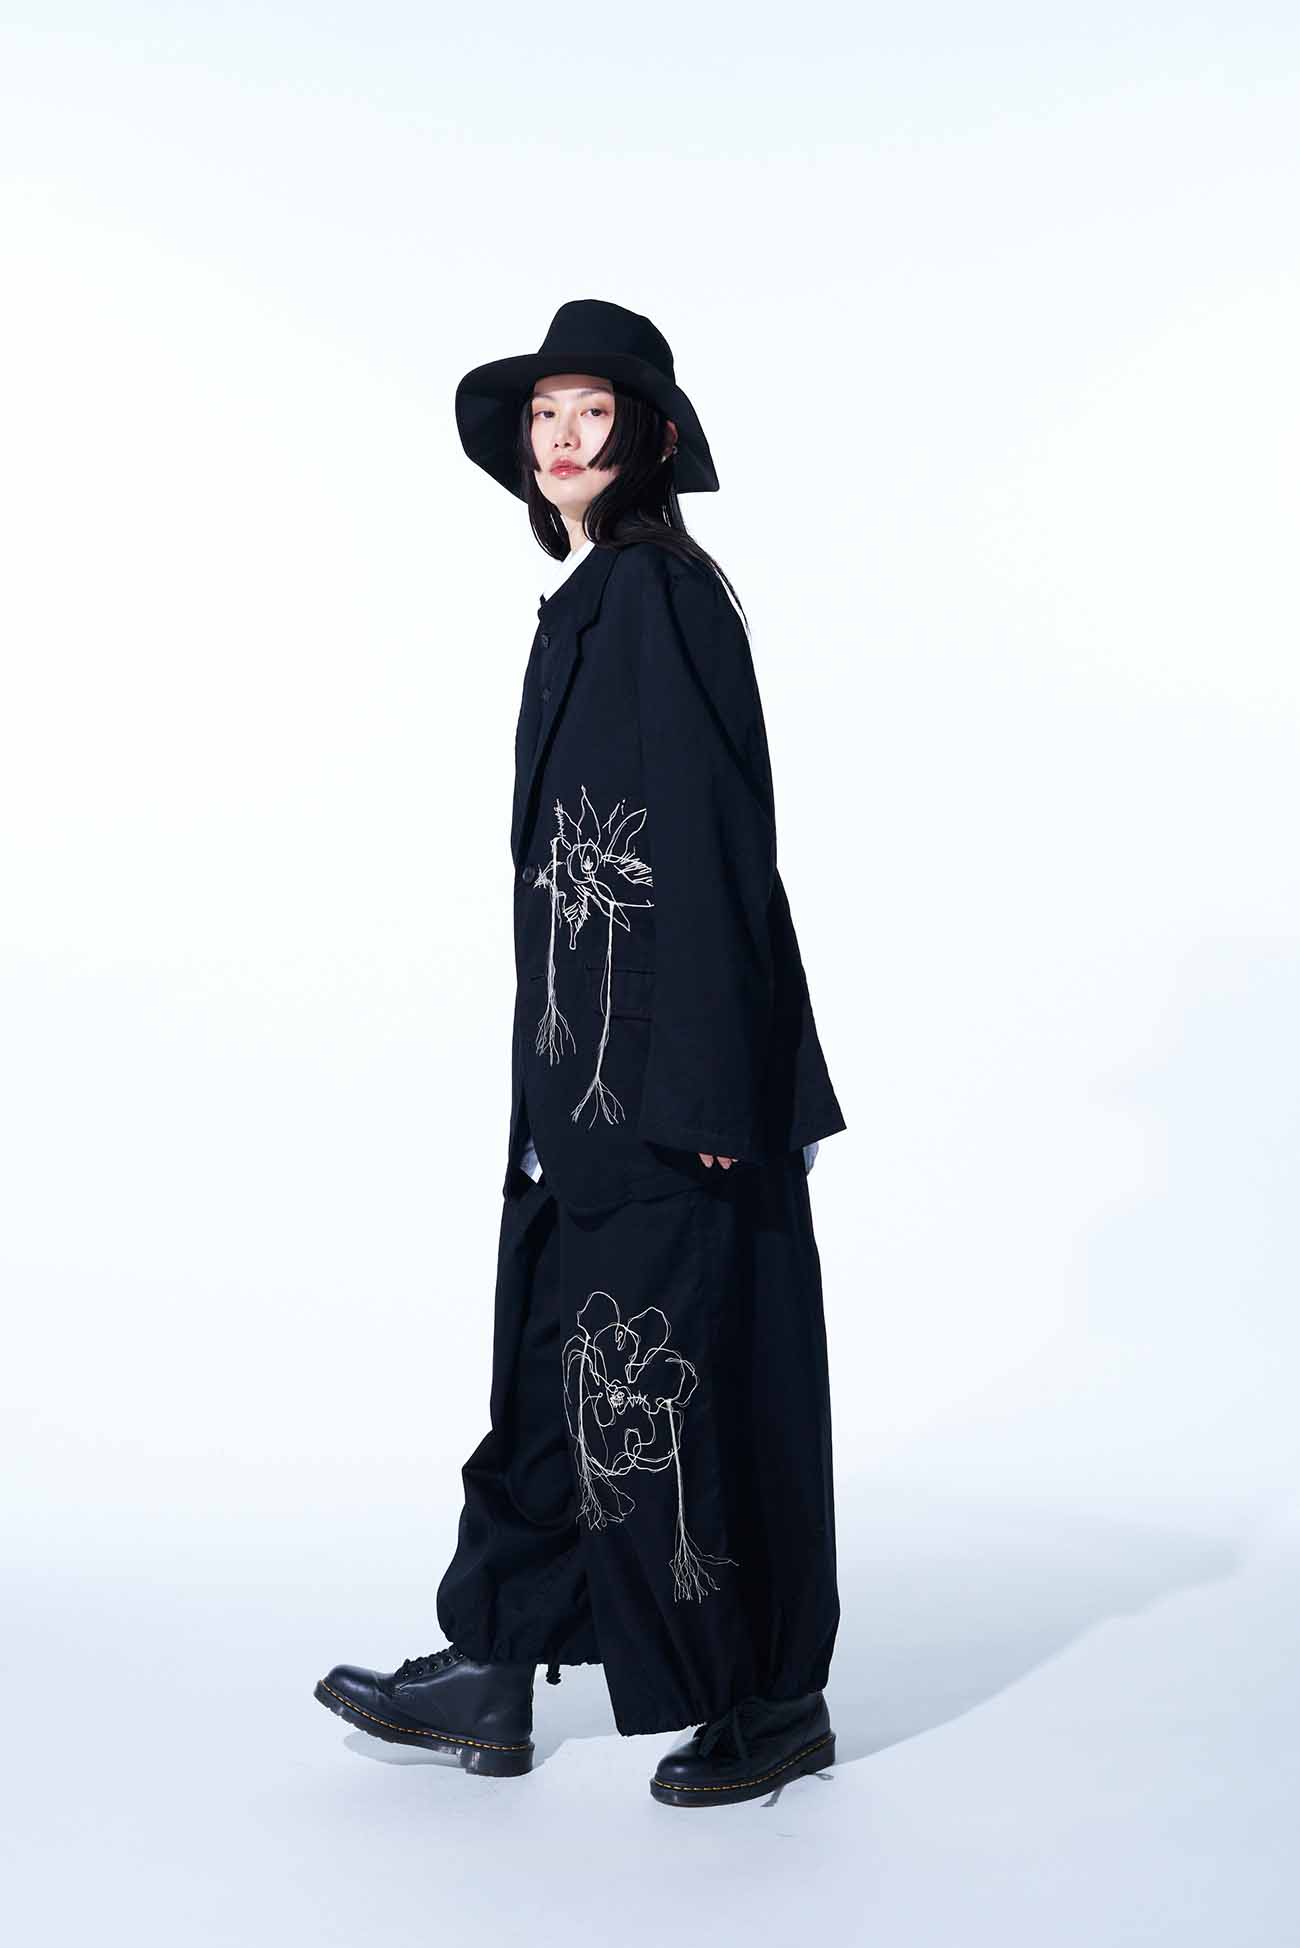 COTTON TWILL “QUEEN OF THE NIGHT“ EMBROIDERY JACKET